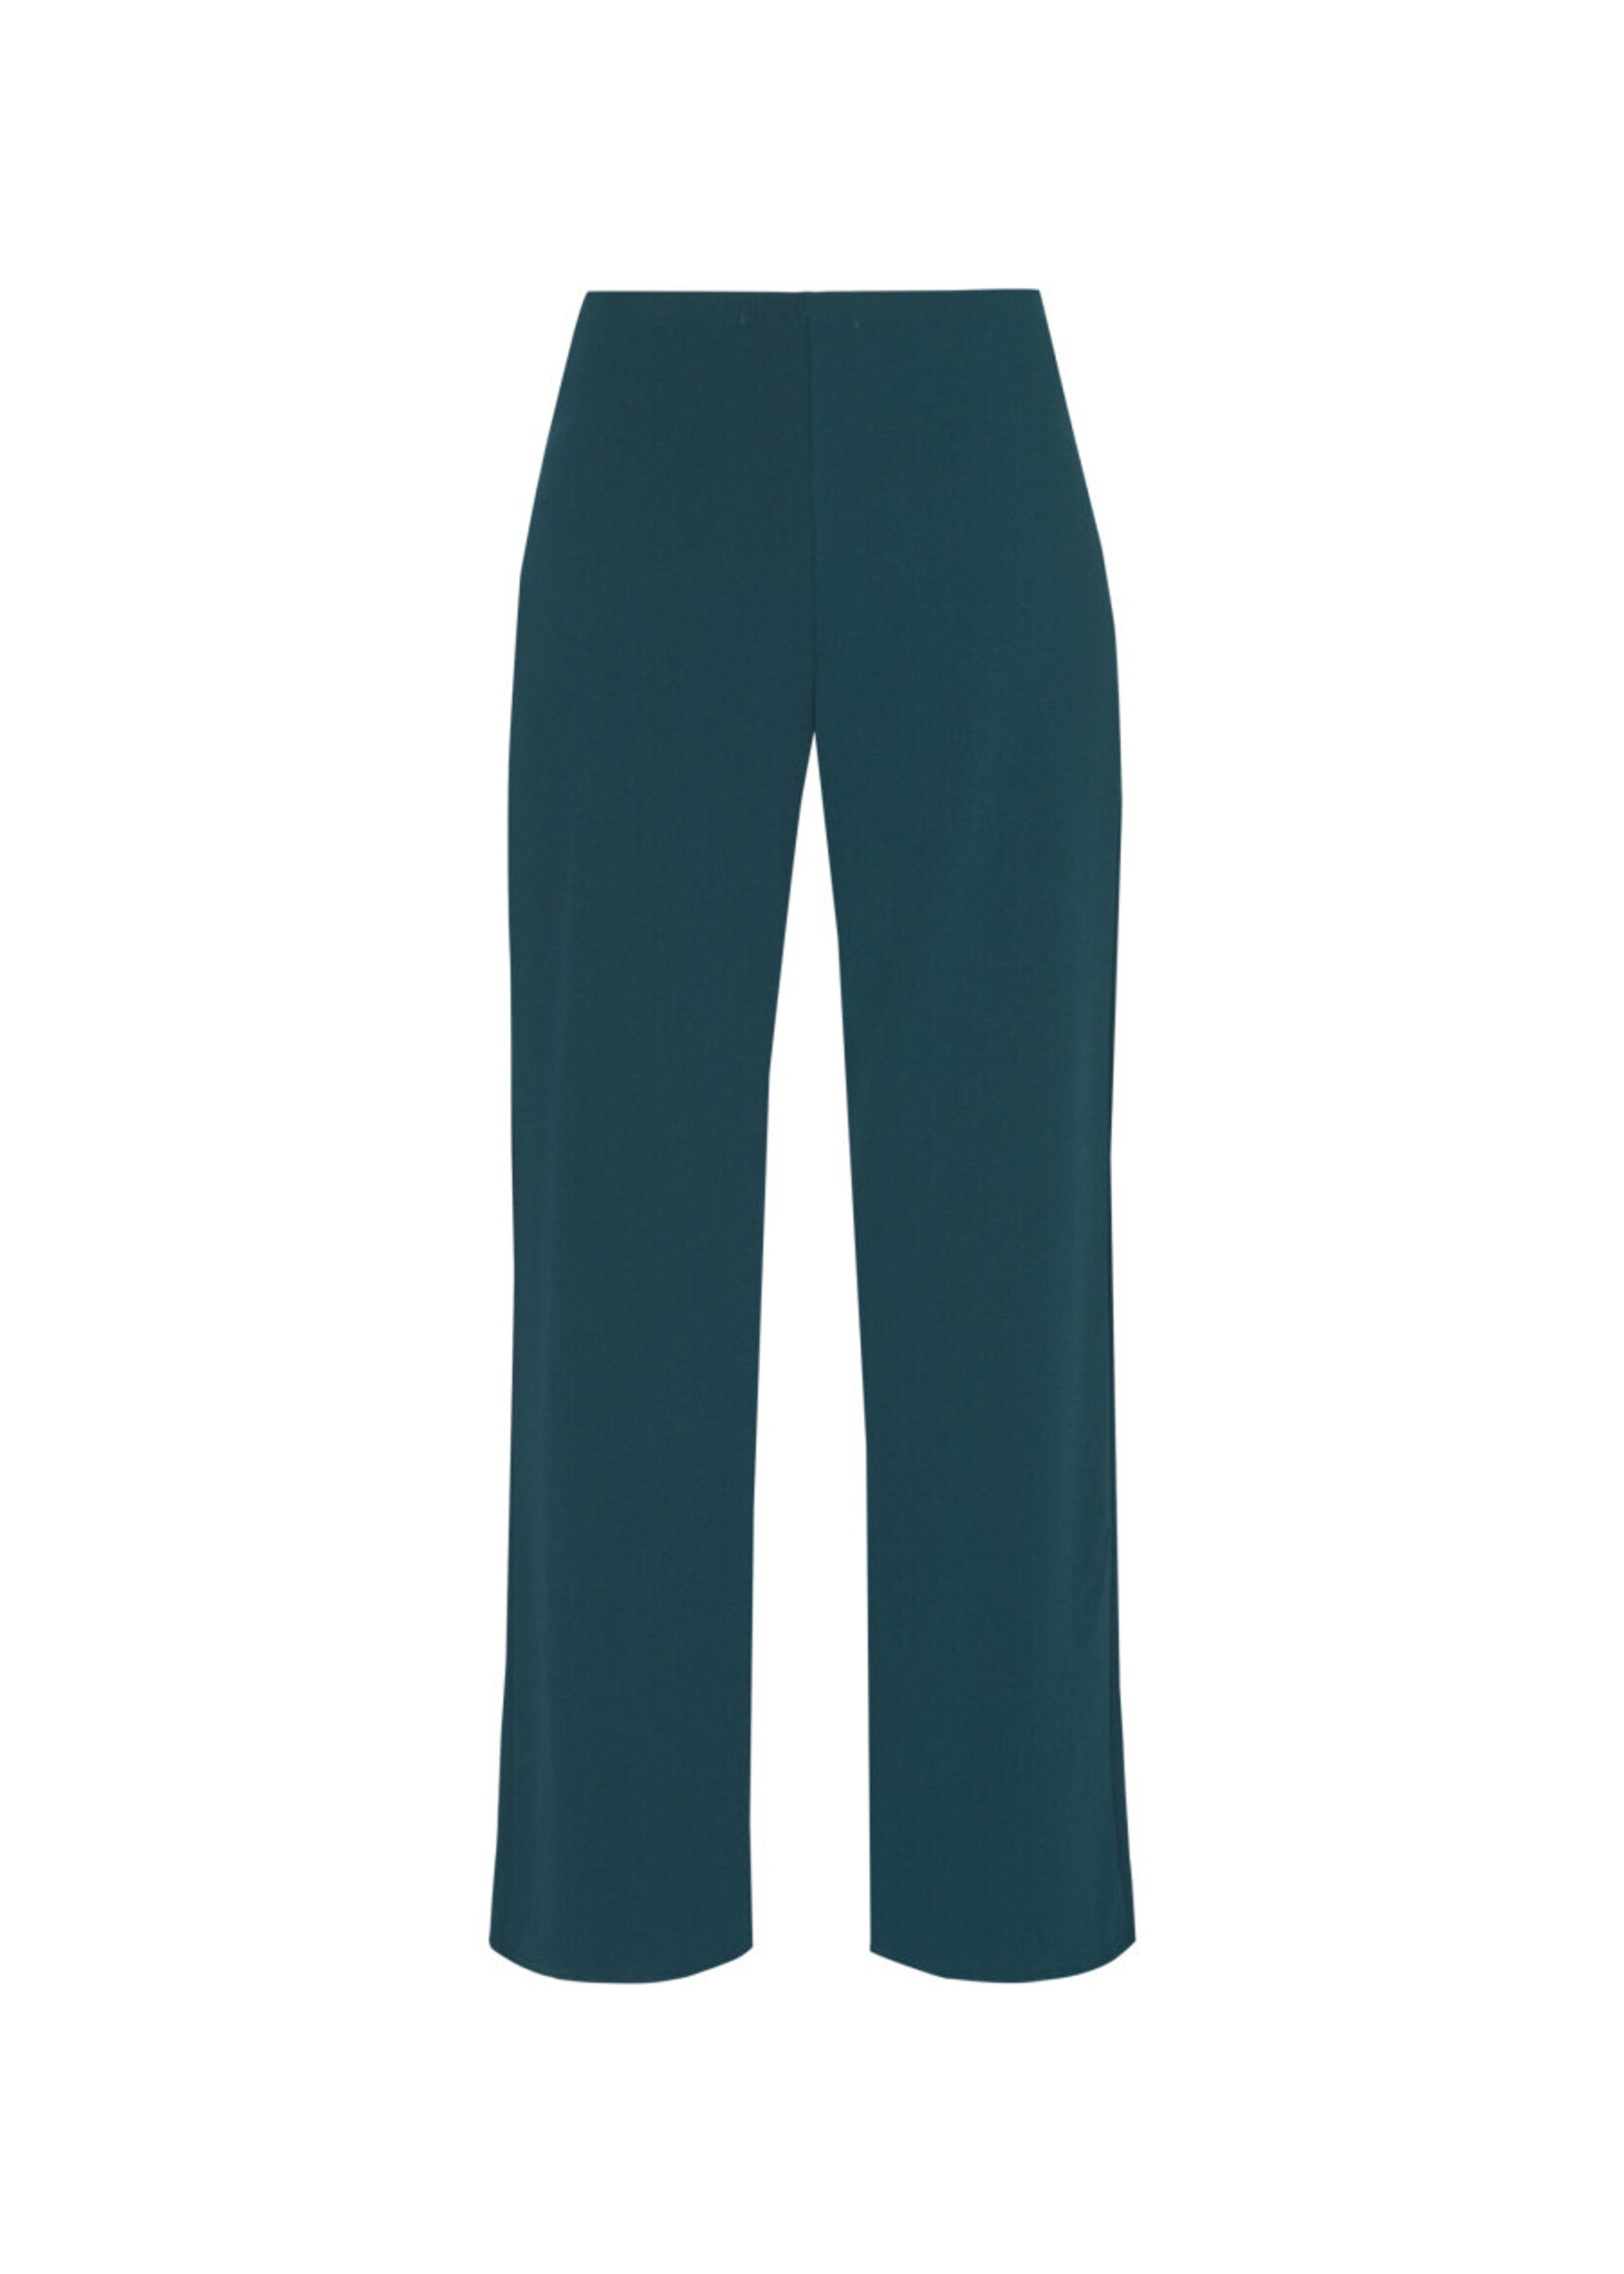 SISTERS POINT Glut pants | pine green